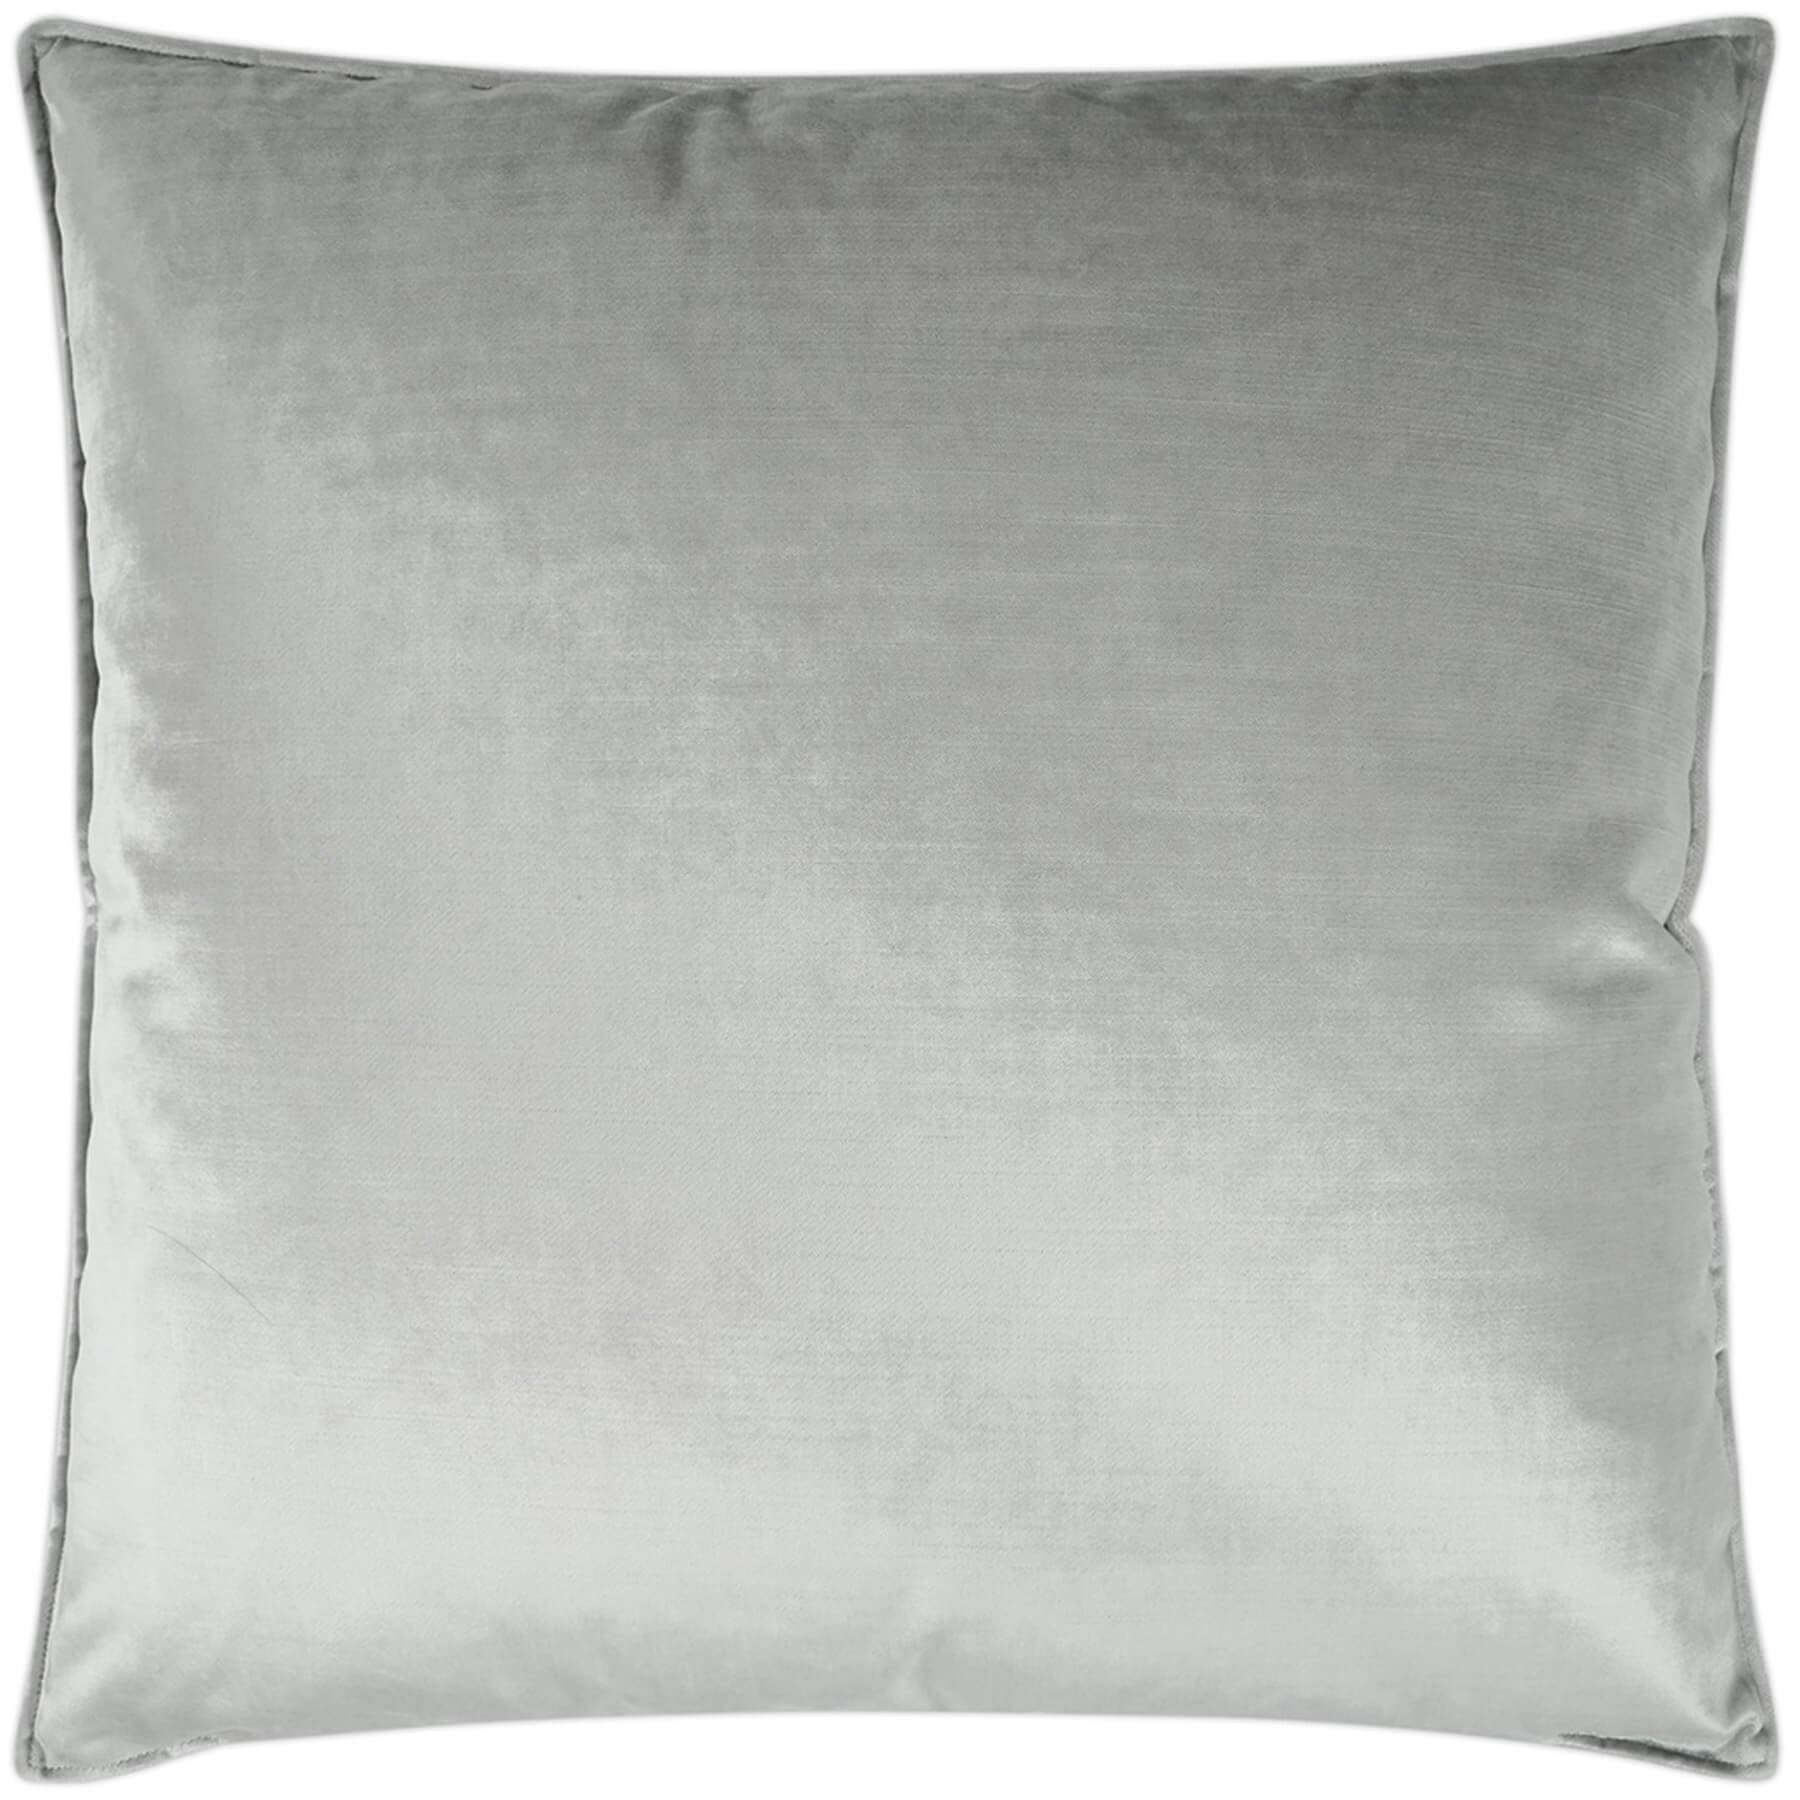 Image of Iridescence Pillow, Silver